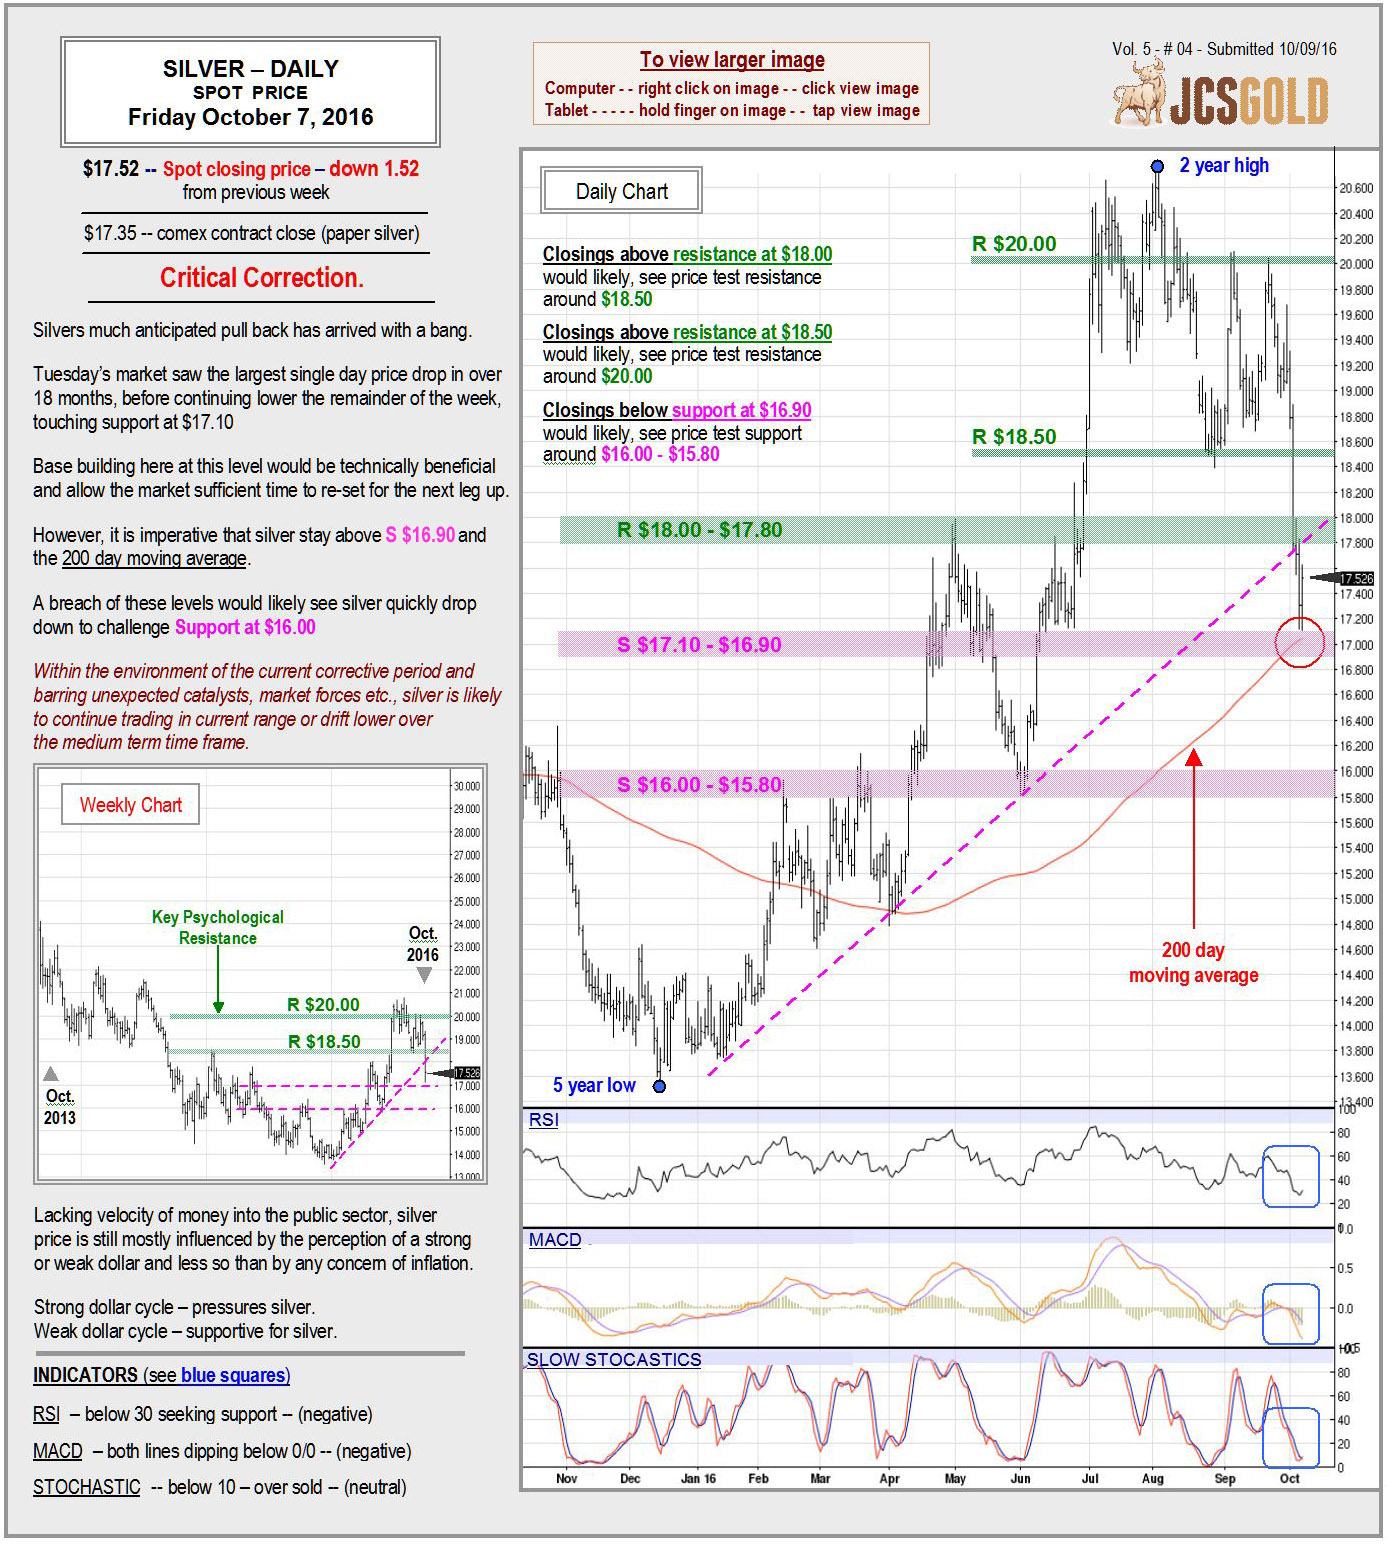 Oct 7, 2016 chart & commentary